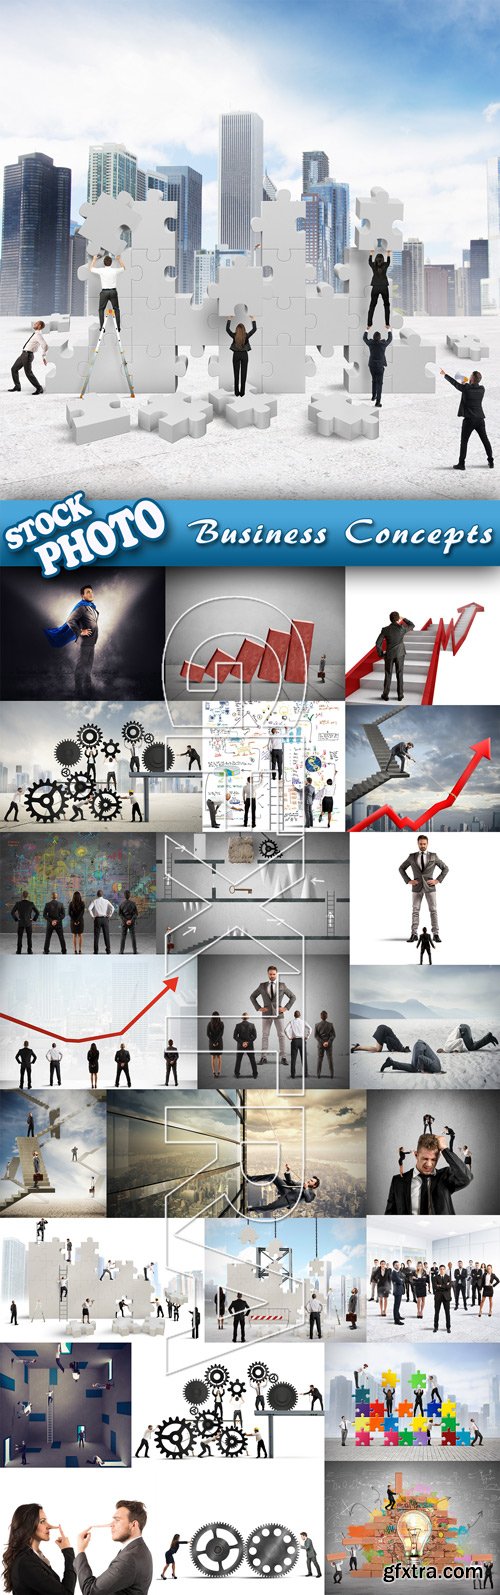 Stock Photo - Business Concepts, 25JPG